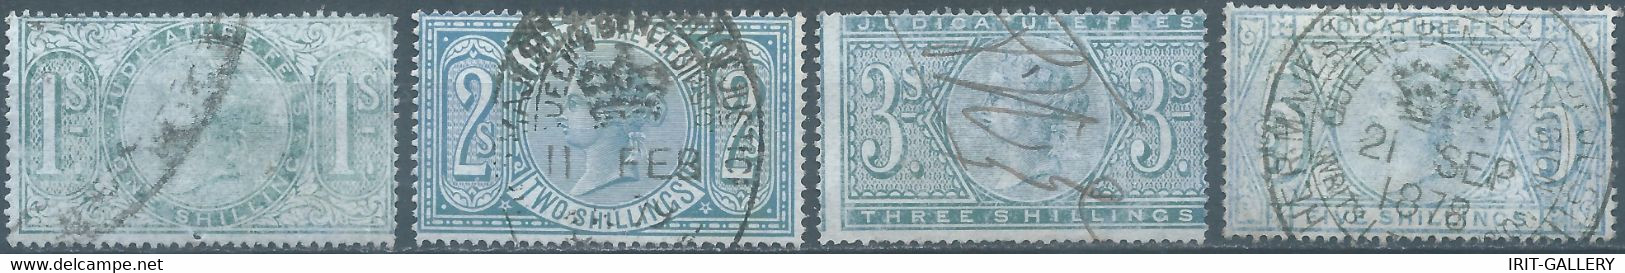 Great Britain-ENGLAND,Queen Victoria,1880-1900 Revenue Stamp Tax Fiscal,JUDICATURE FEES,1-2-3-5 Shillings,Used - Revenue Stamps